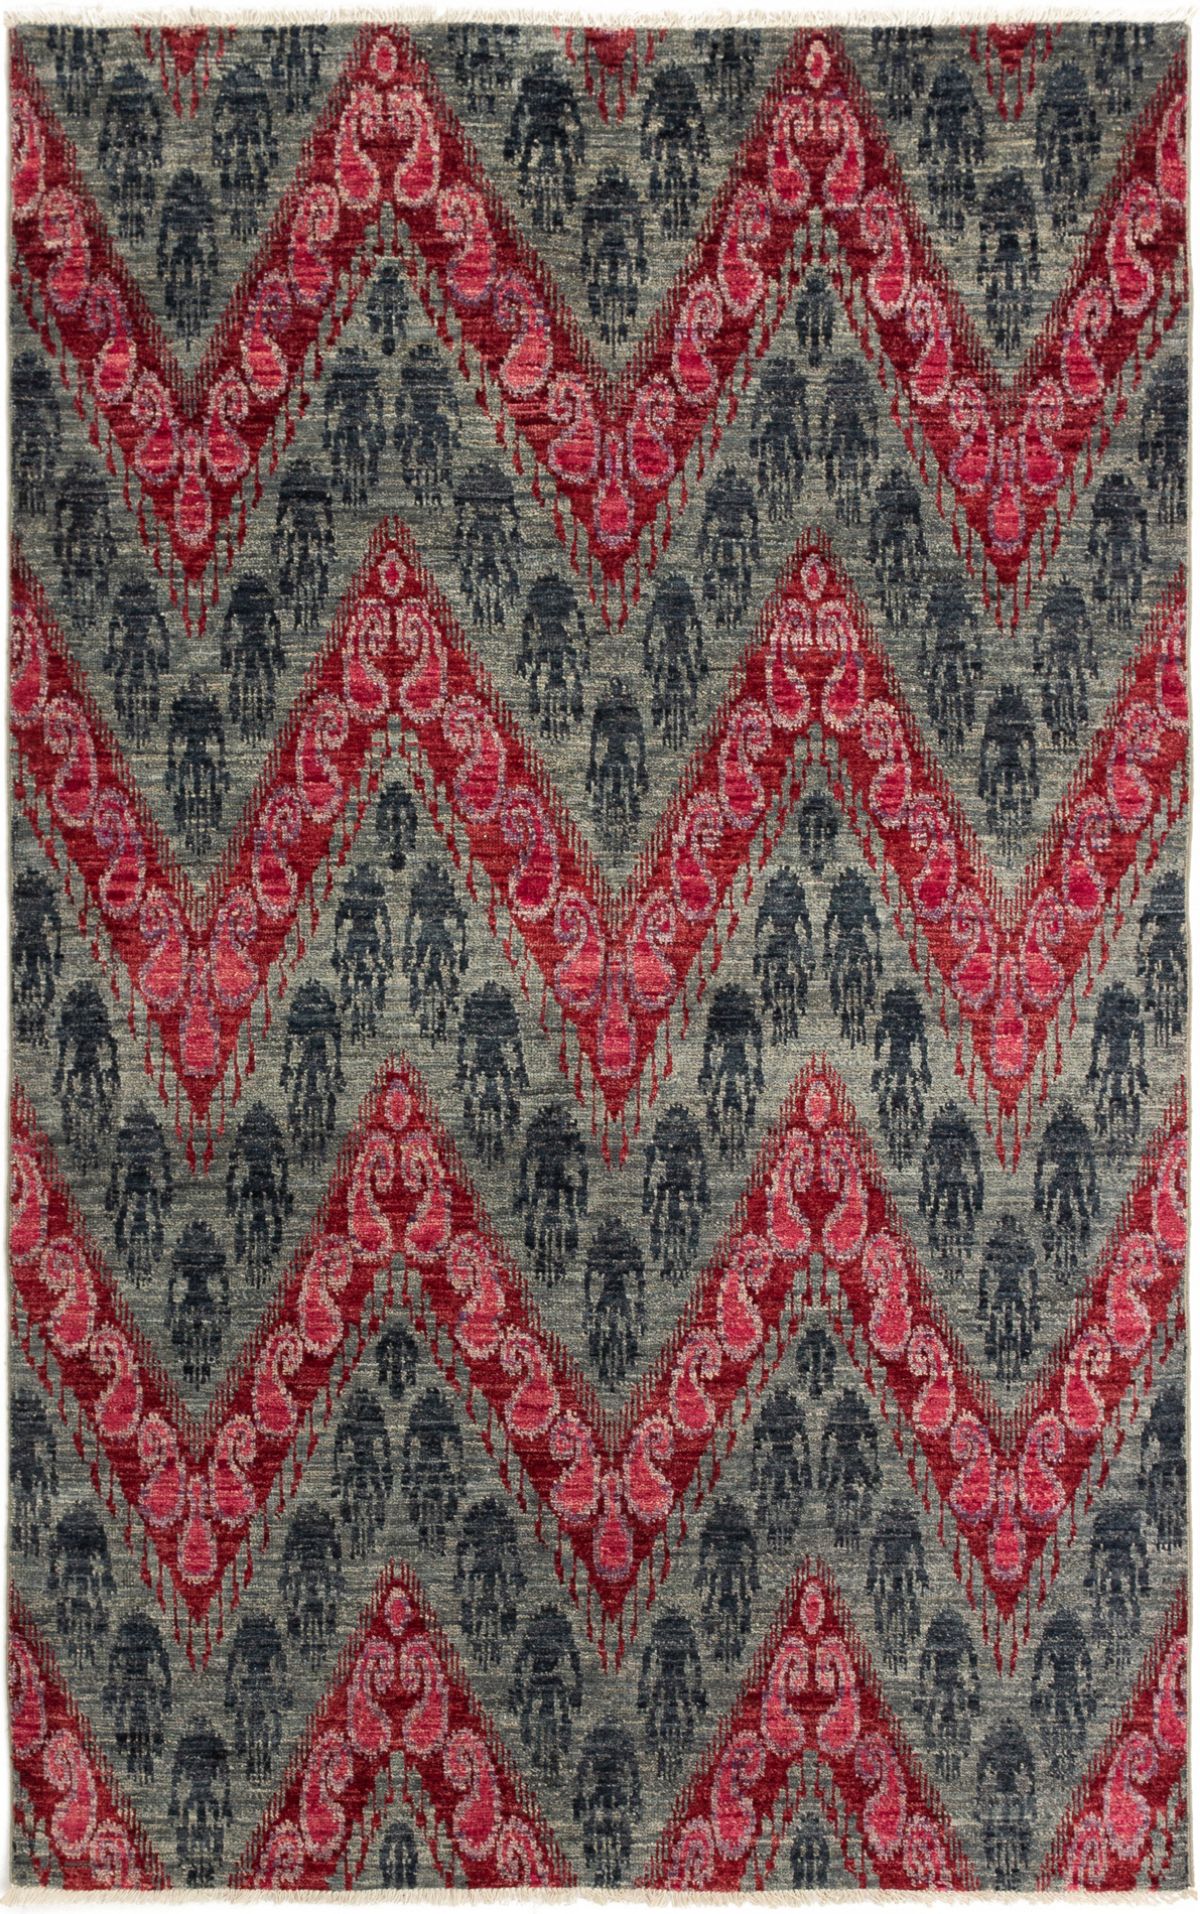 Hand-knotted Shalimar Dark Red, Grey Wool Rug 5'11" x 9'4" Size: 5'11" x 9'4"  